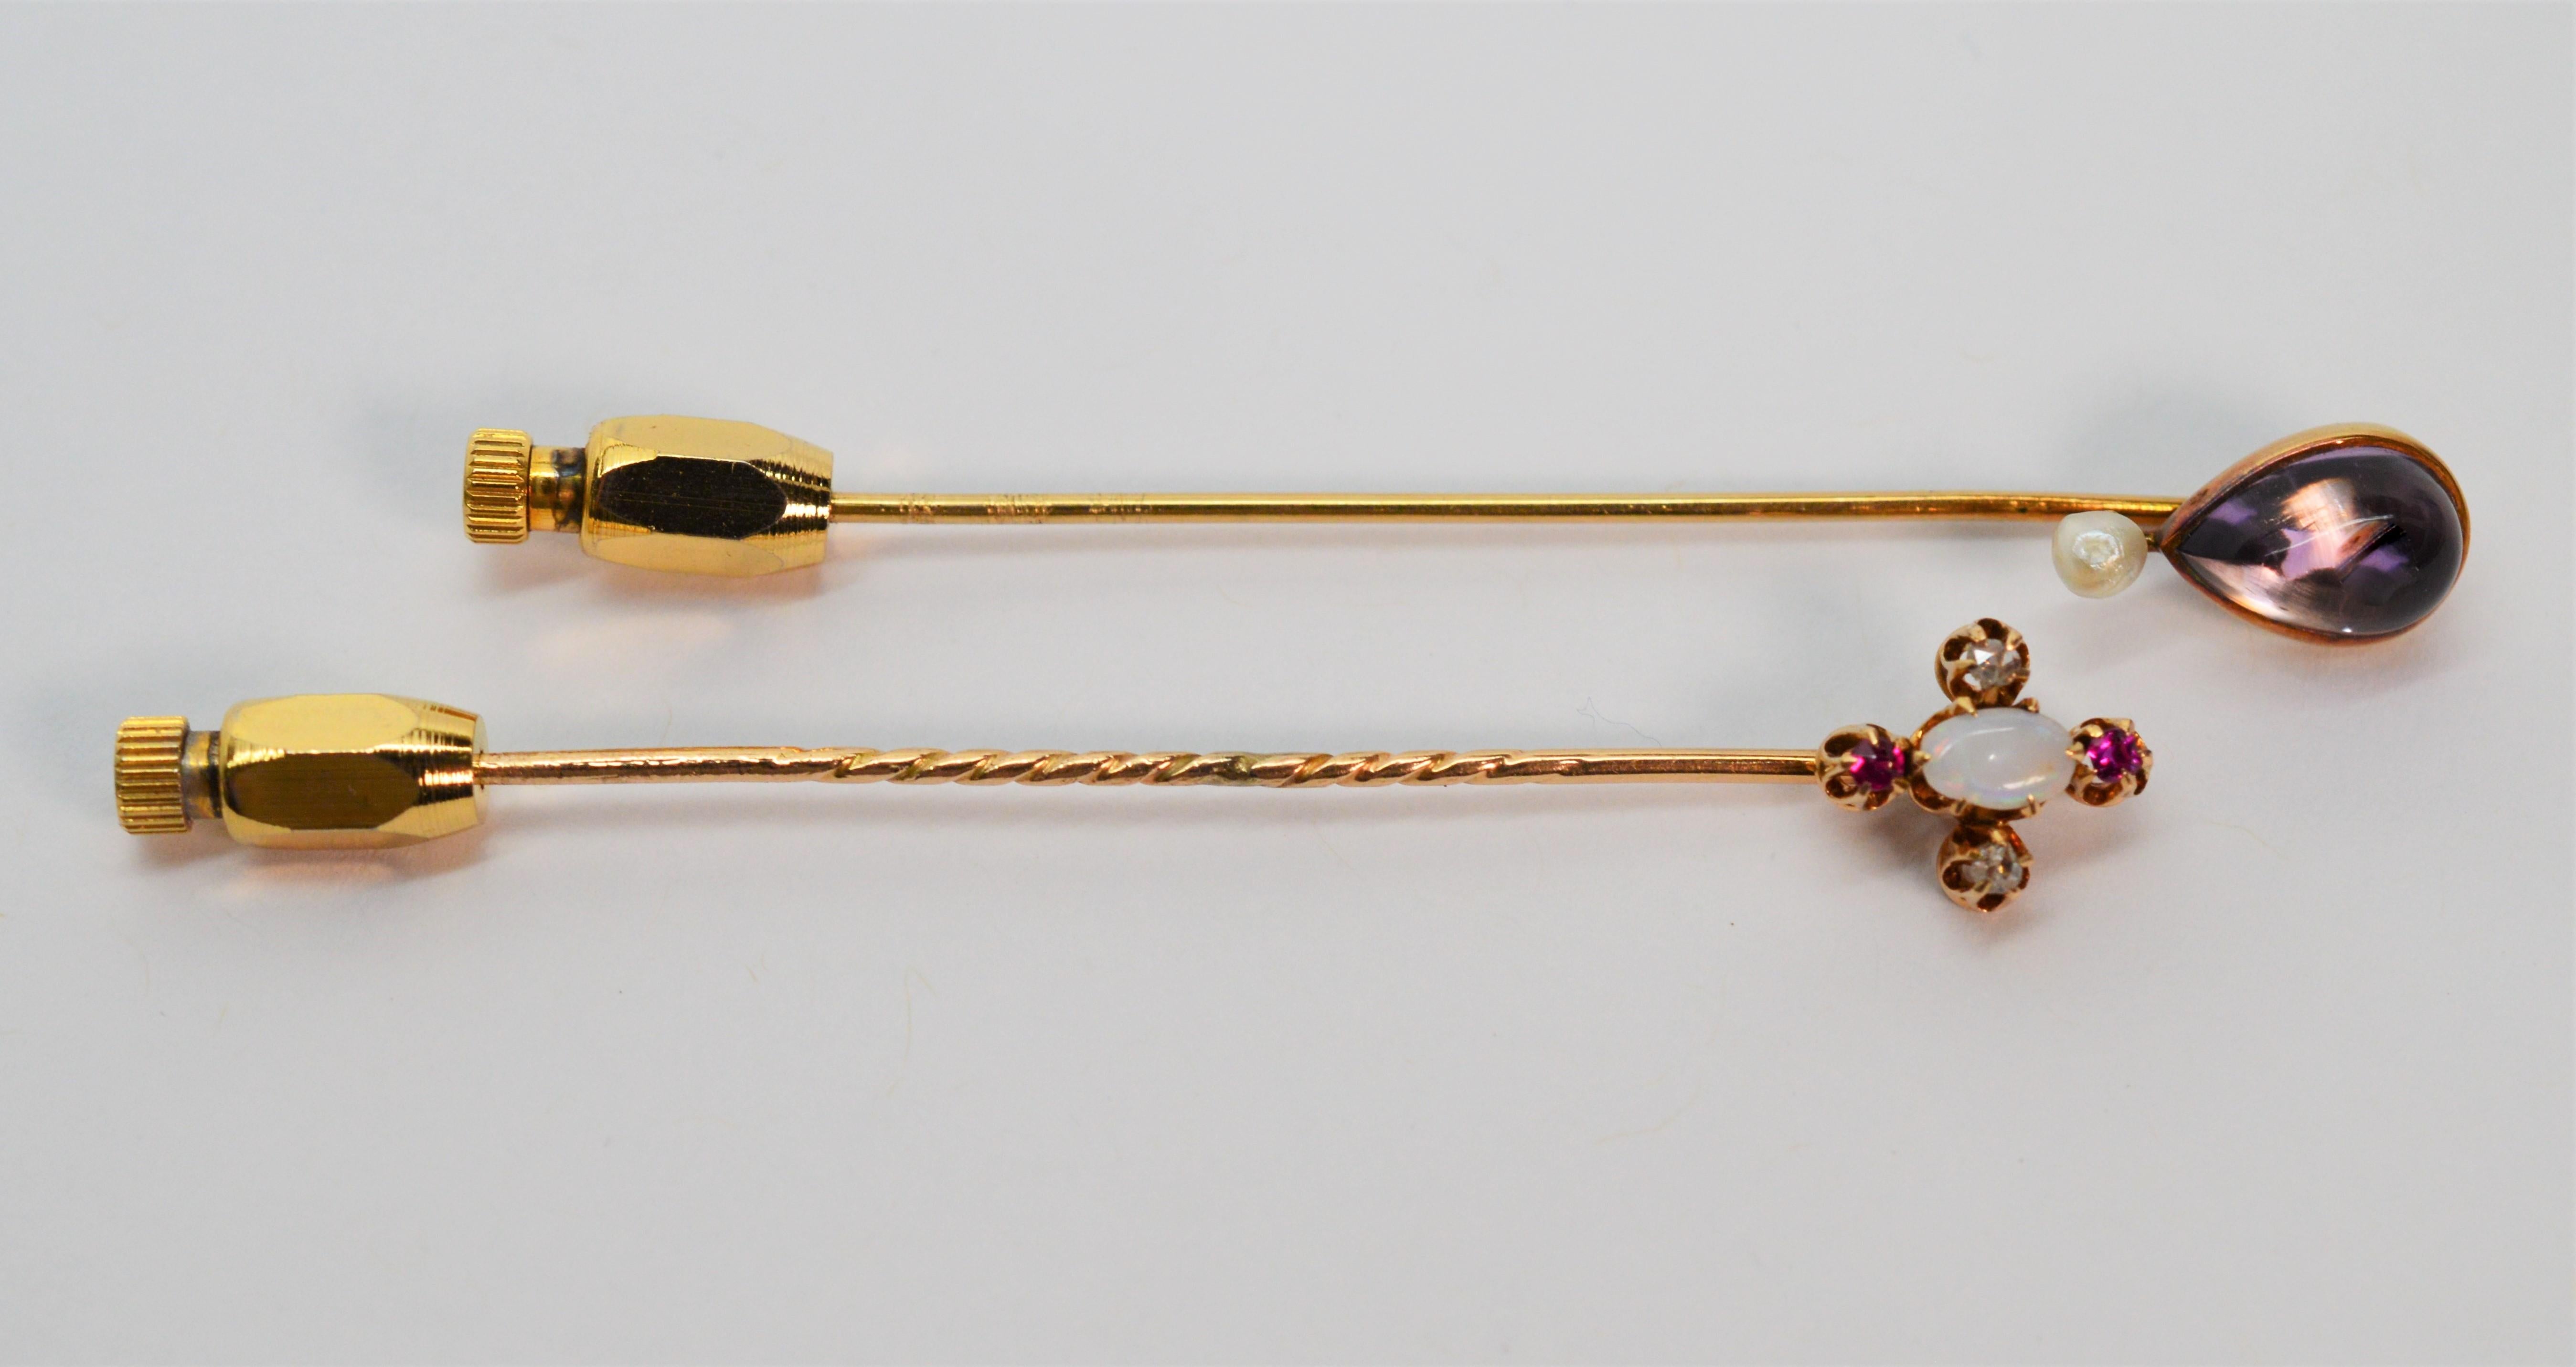 Twice the period finery, just because. This vintage fourteen karat 14K yellow gold stick pin duo includes one Art Deco opal, ruby and diamond stick pin and one stick pin with a pear shaped amethyst cabochon and pearl accent. Both pins are perfect